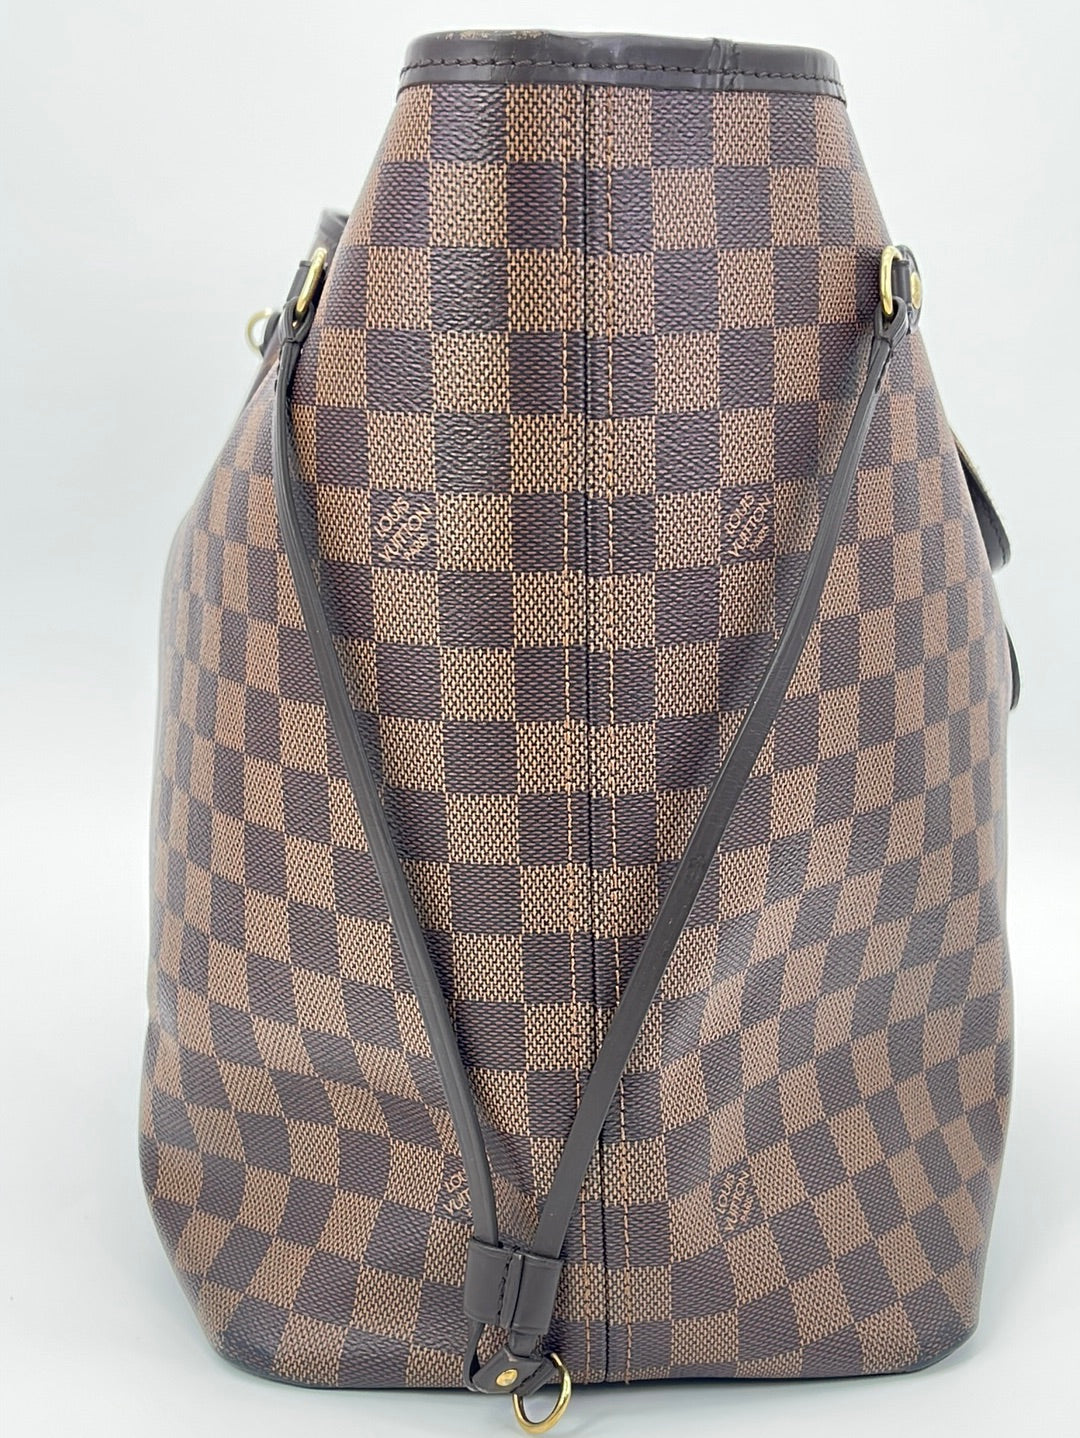 PRELOVED Louis Vuitton Damier Ebene Neverfull GM Tote Bag Y6DT8W8 040823 - $300 OFF LIVE SHOW SALE